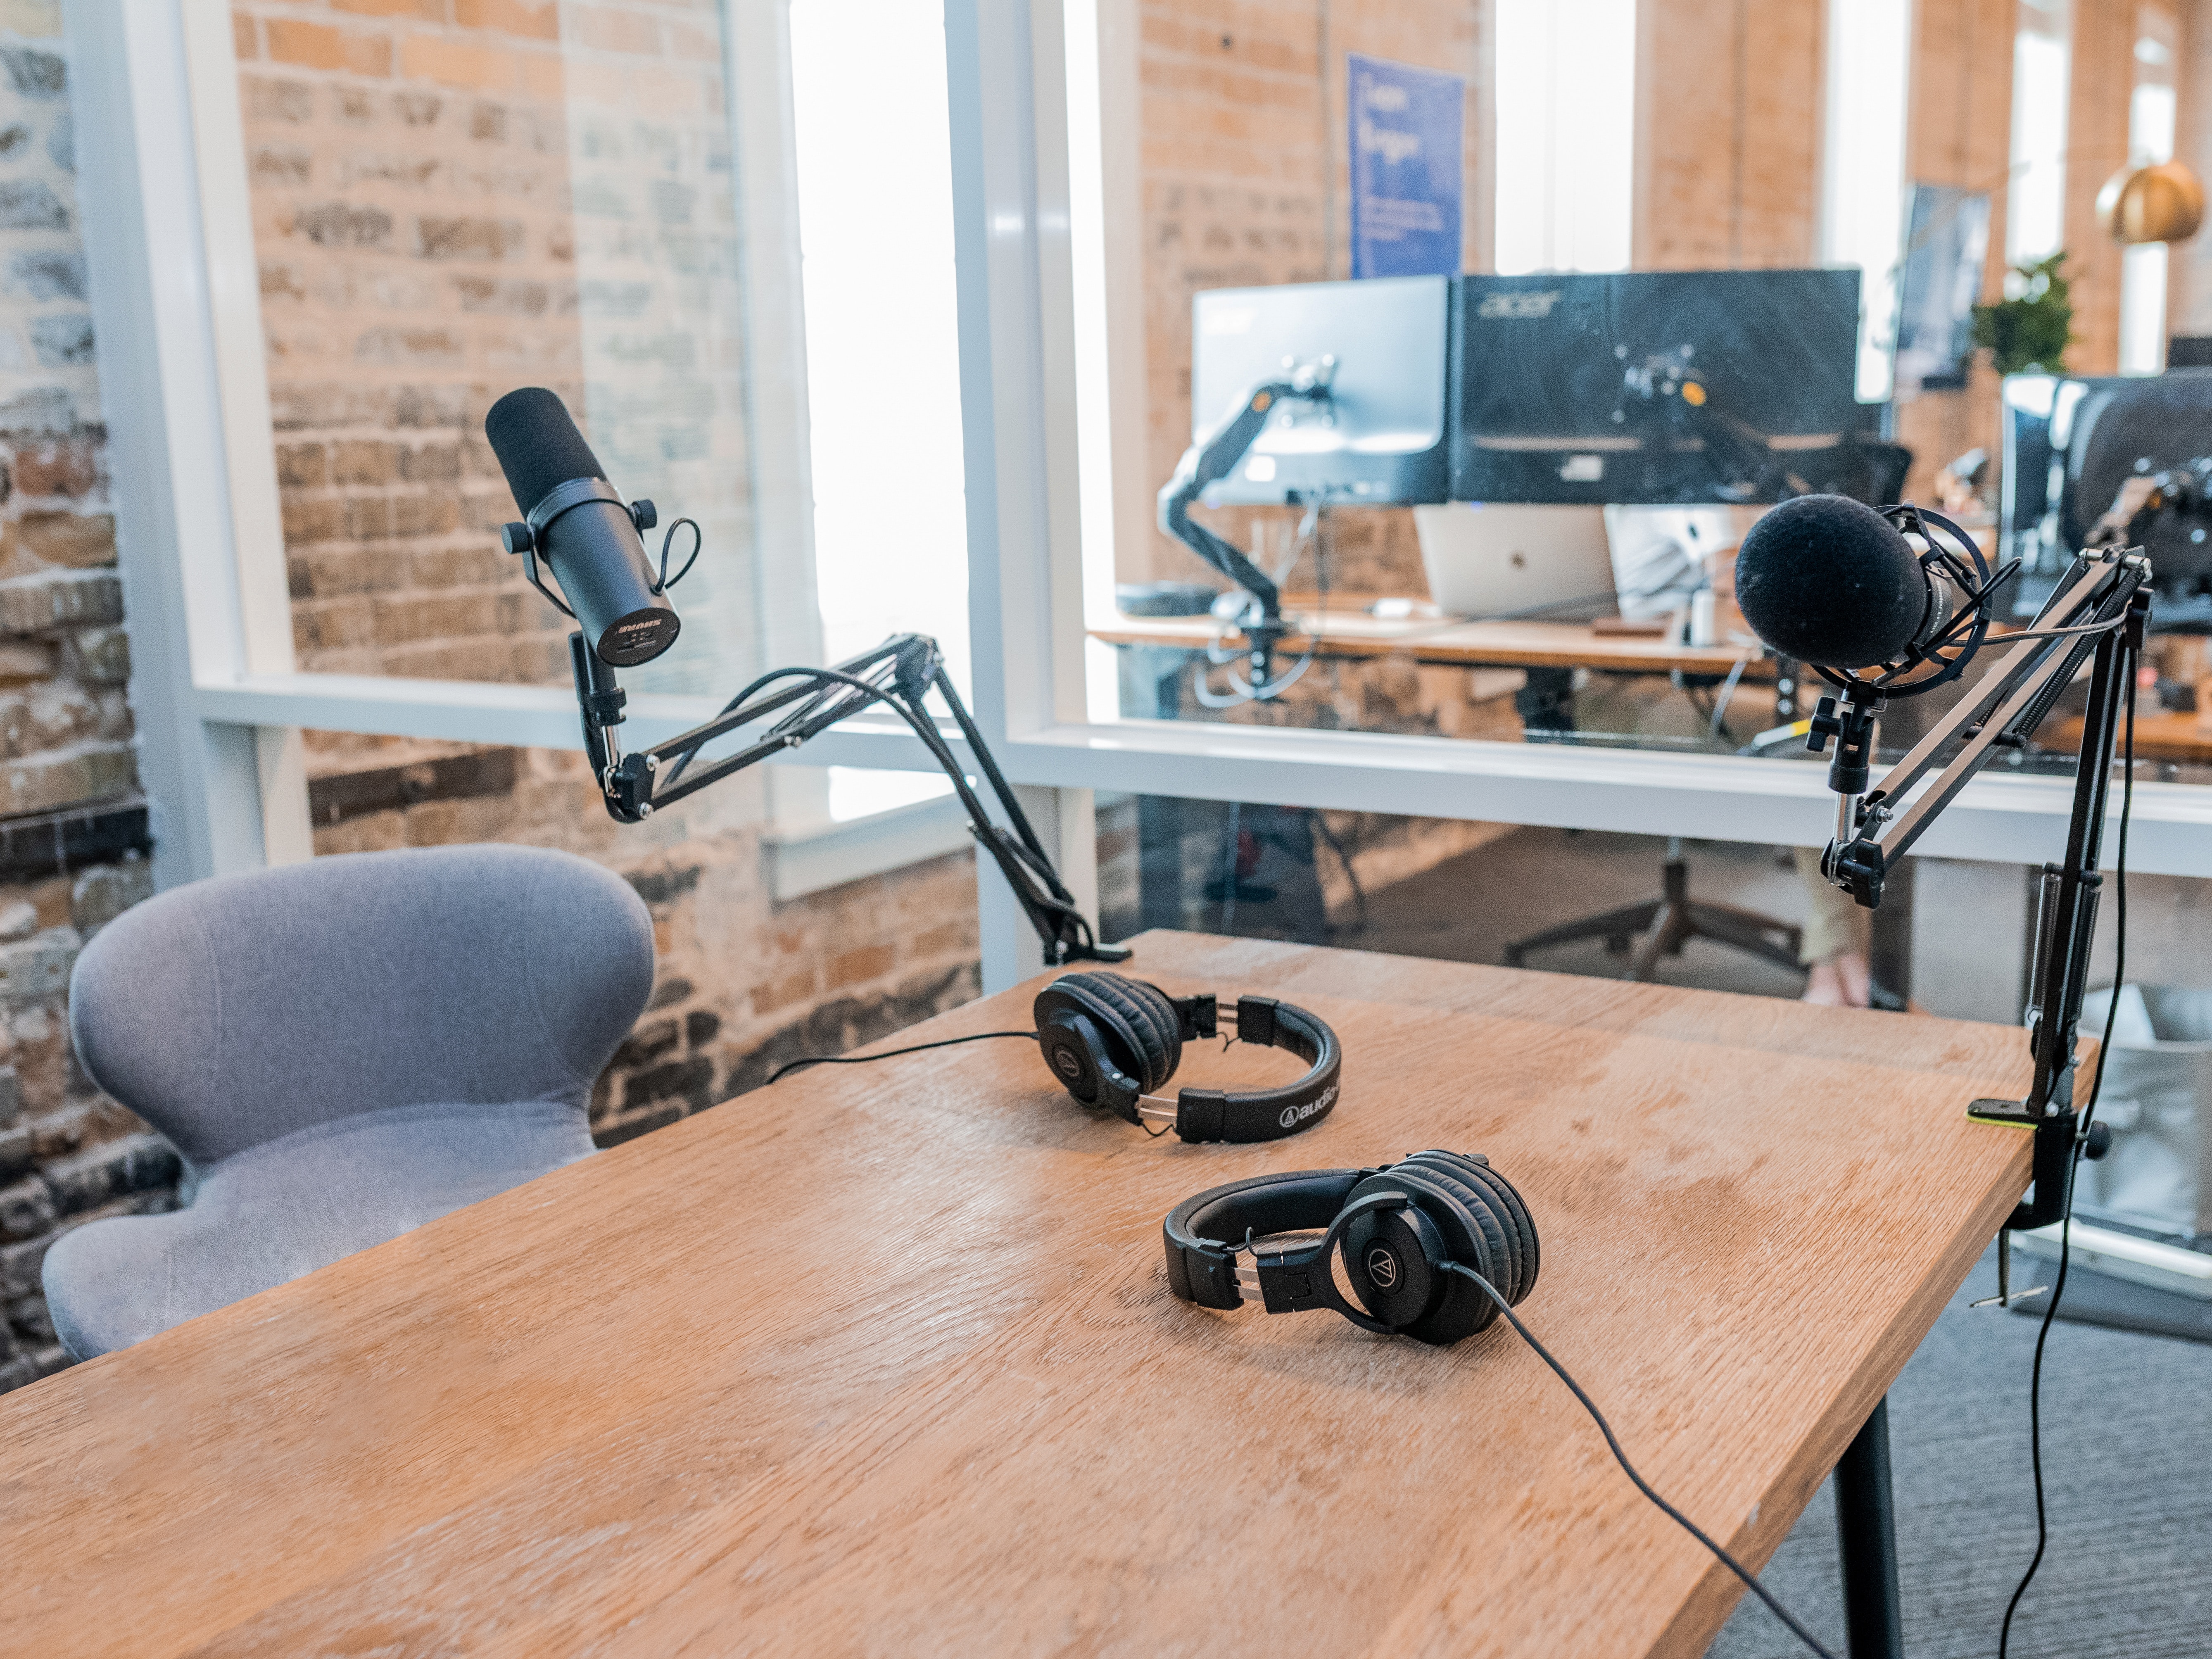 Should Your Company Start a Podcast? Thoughts from Digital Culture Expert Johnson Nguyen